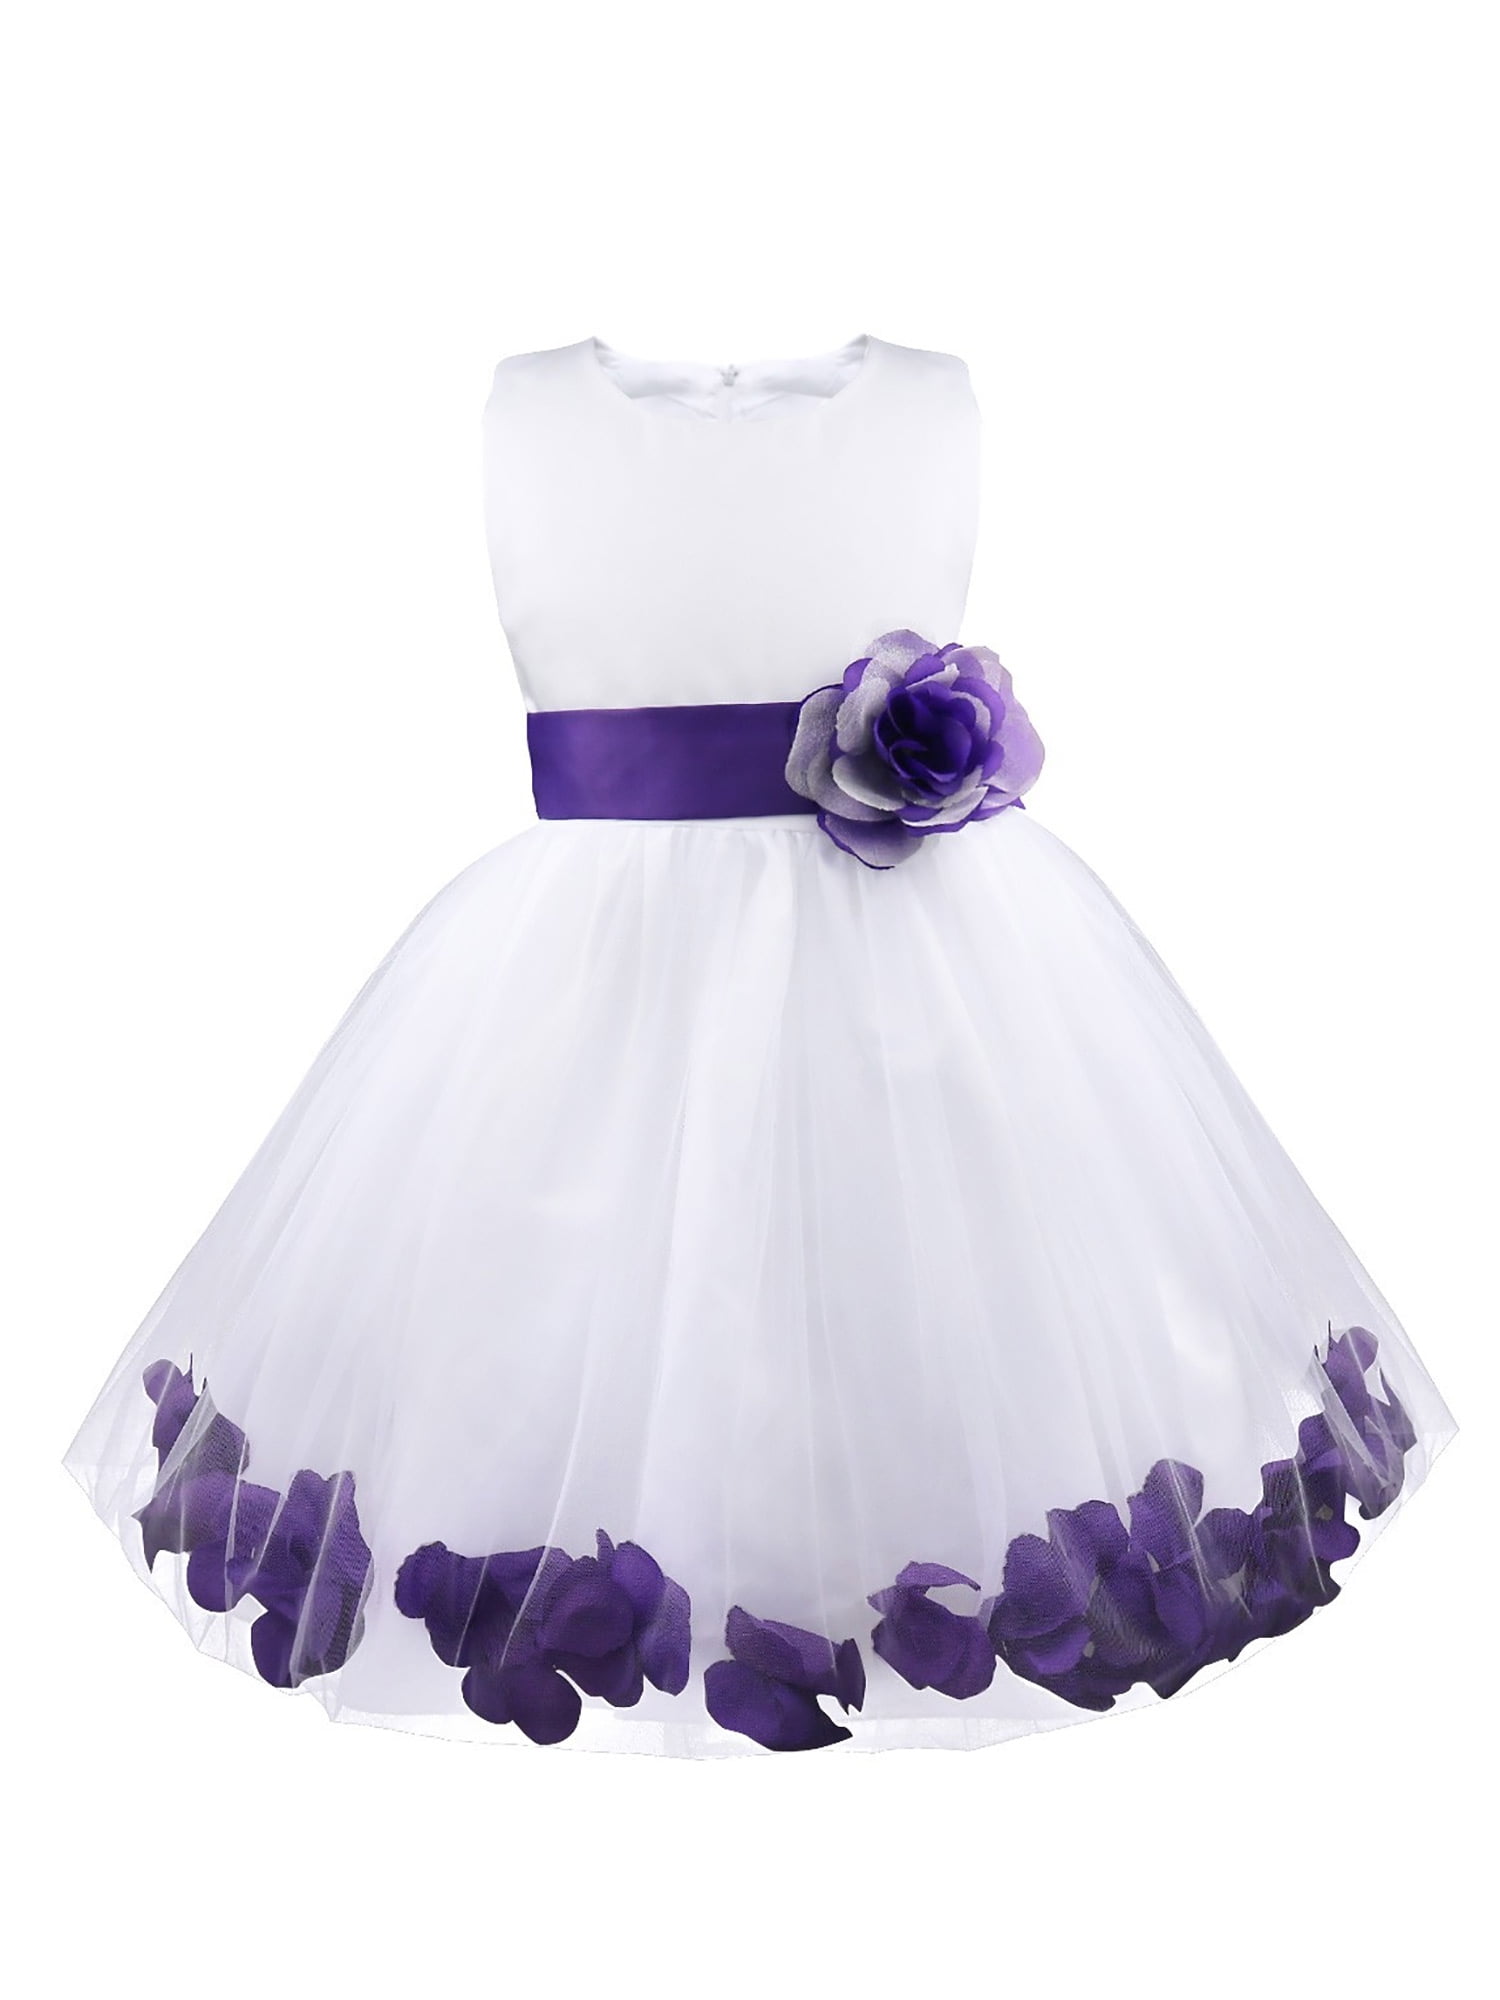 iEFiEL Infant Baby Girls Satin Bowknot Flower Girl Dress Petals Tulle ...